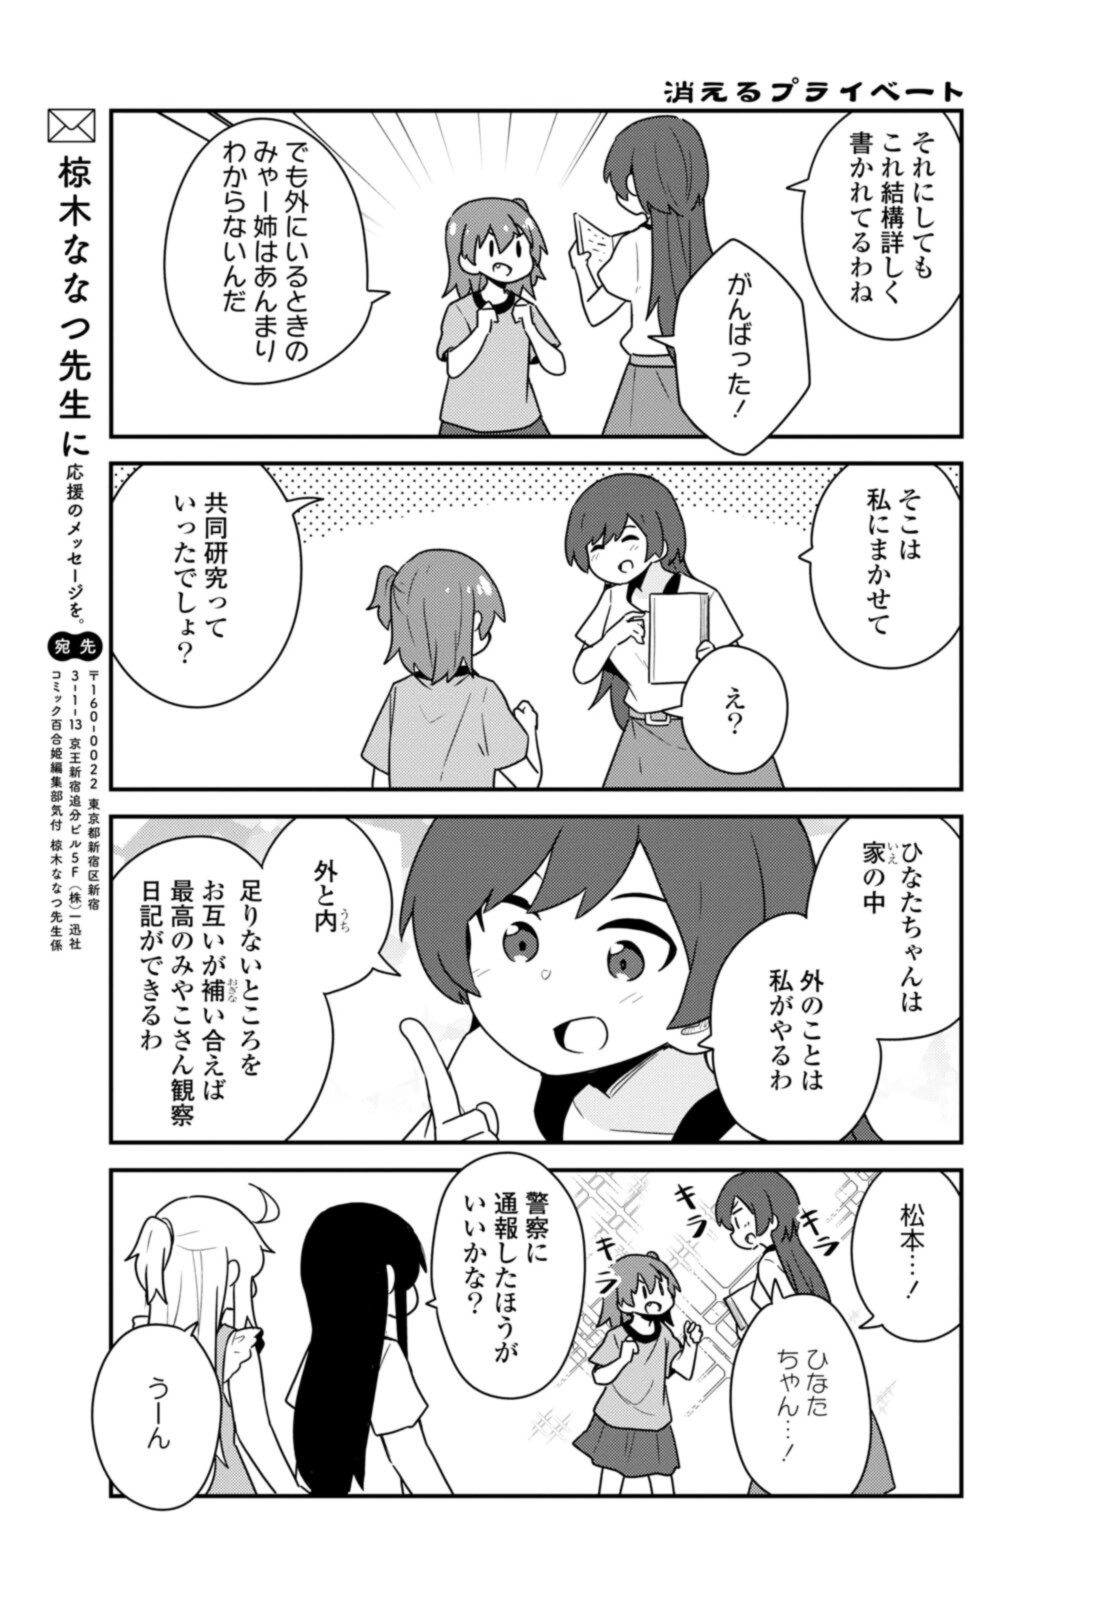 Wataten! An Angel Flew Down to Me 私に天使が舞い降りた！ 第90話 - Page 13